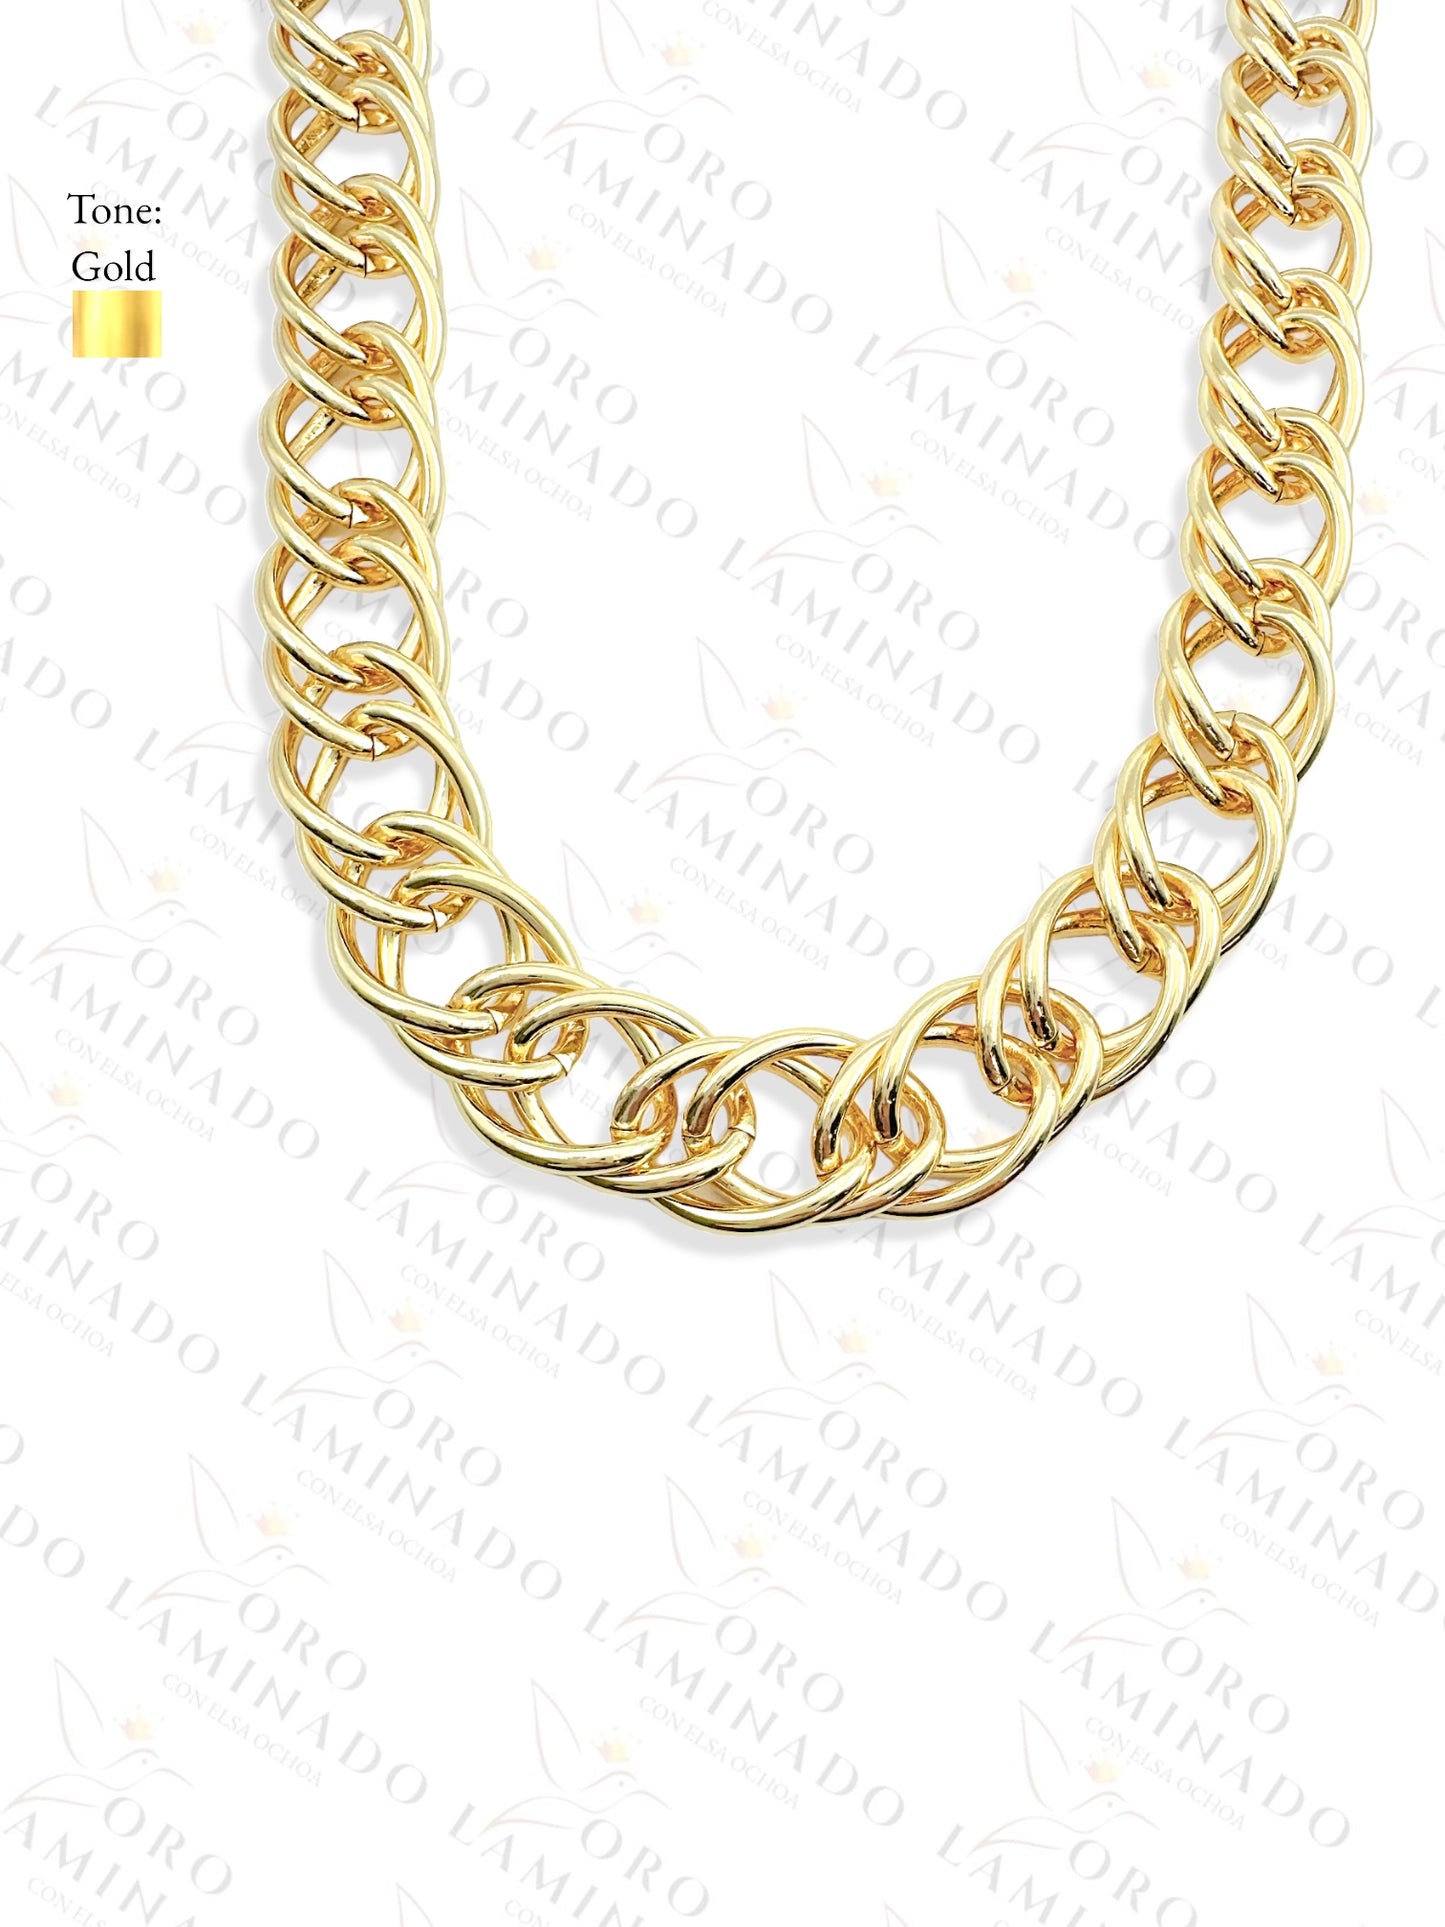 Cuban CHains Pack of 3 Size 18" 17mm B299